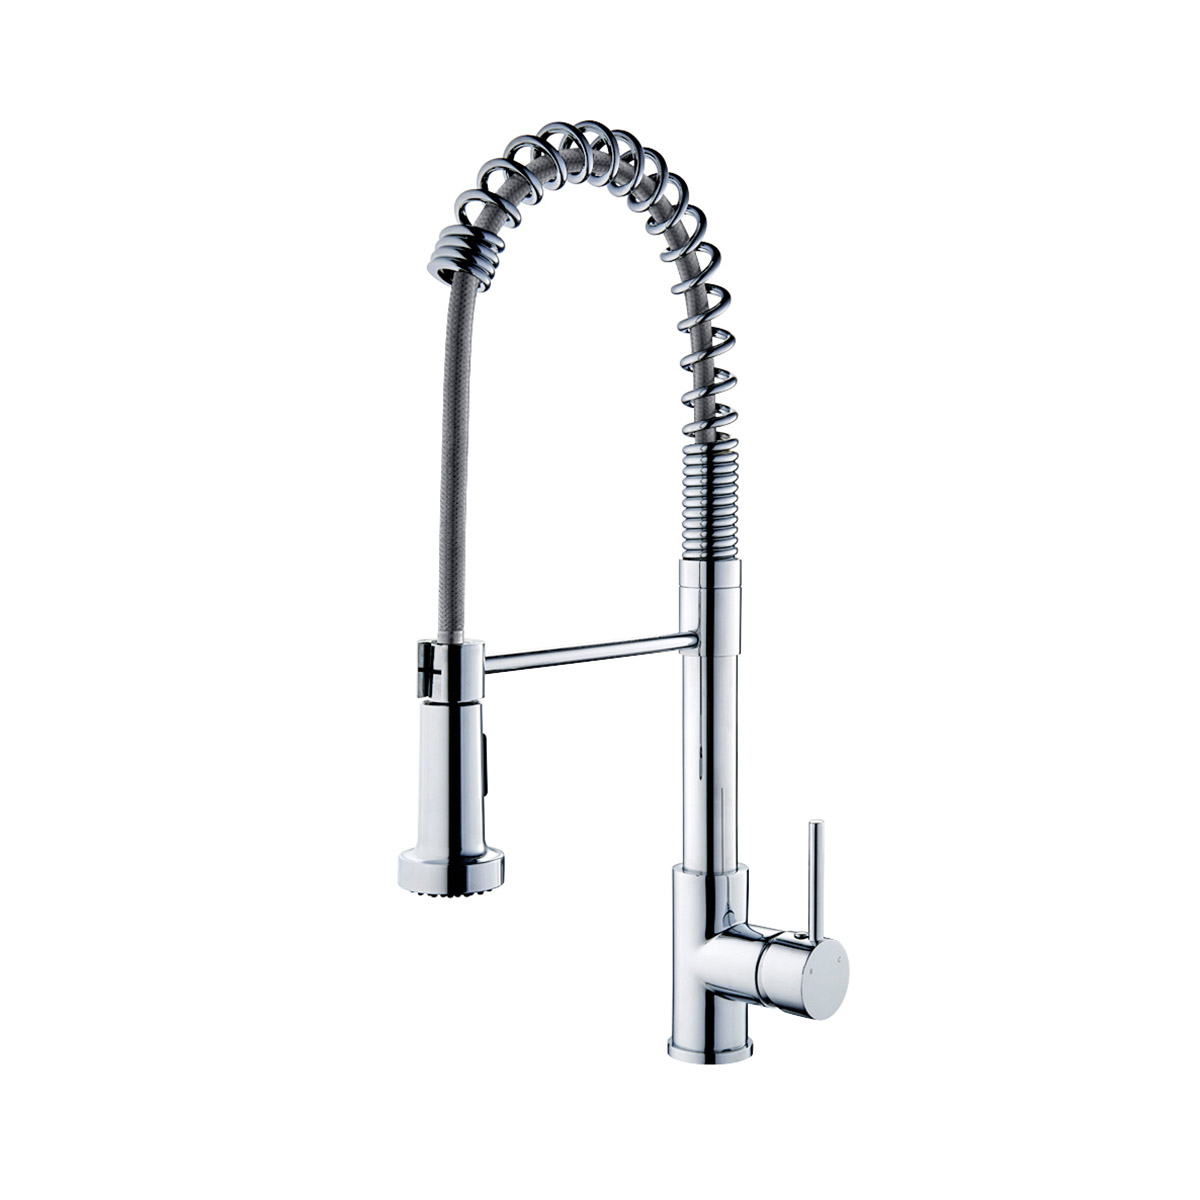 The Rosa single lever pull out tap has a long neck and gives an elegant feel to any space. Available in chrome finish.